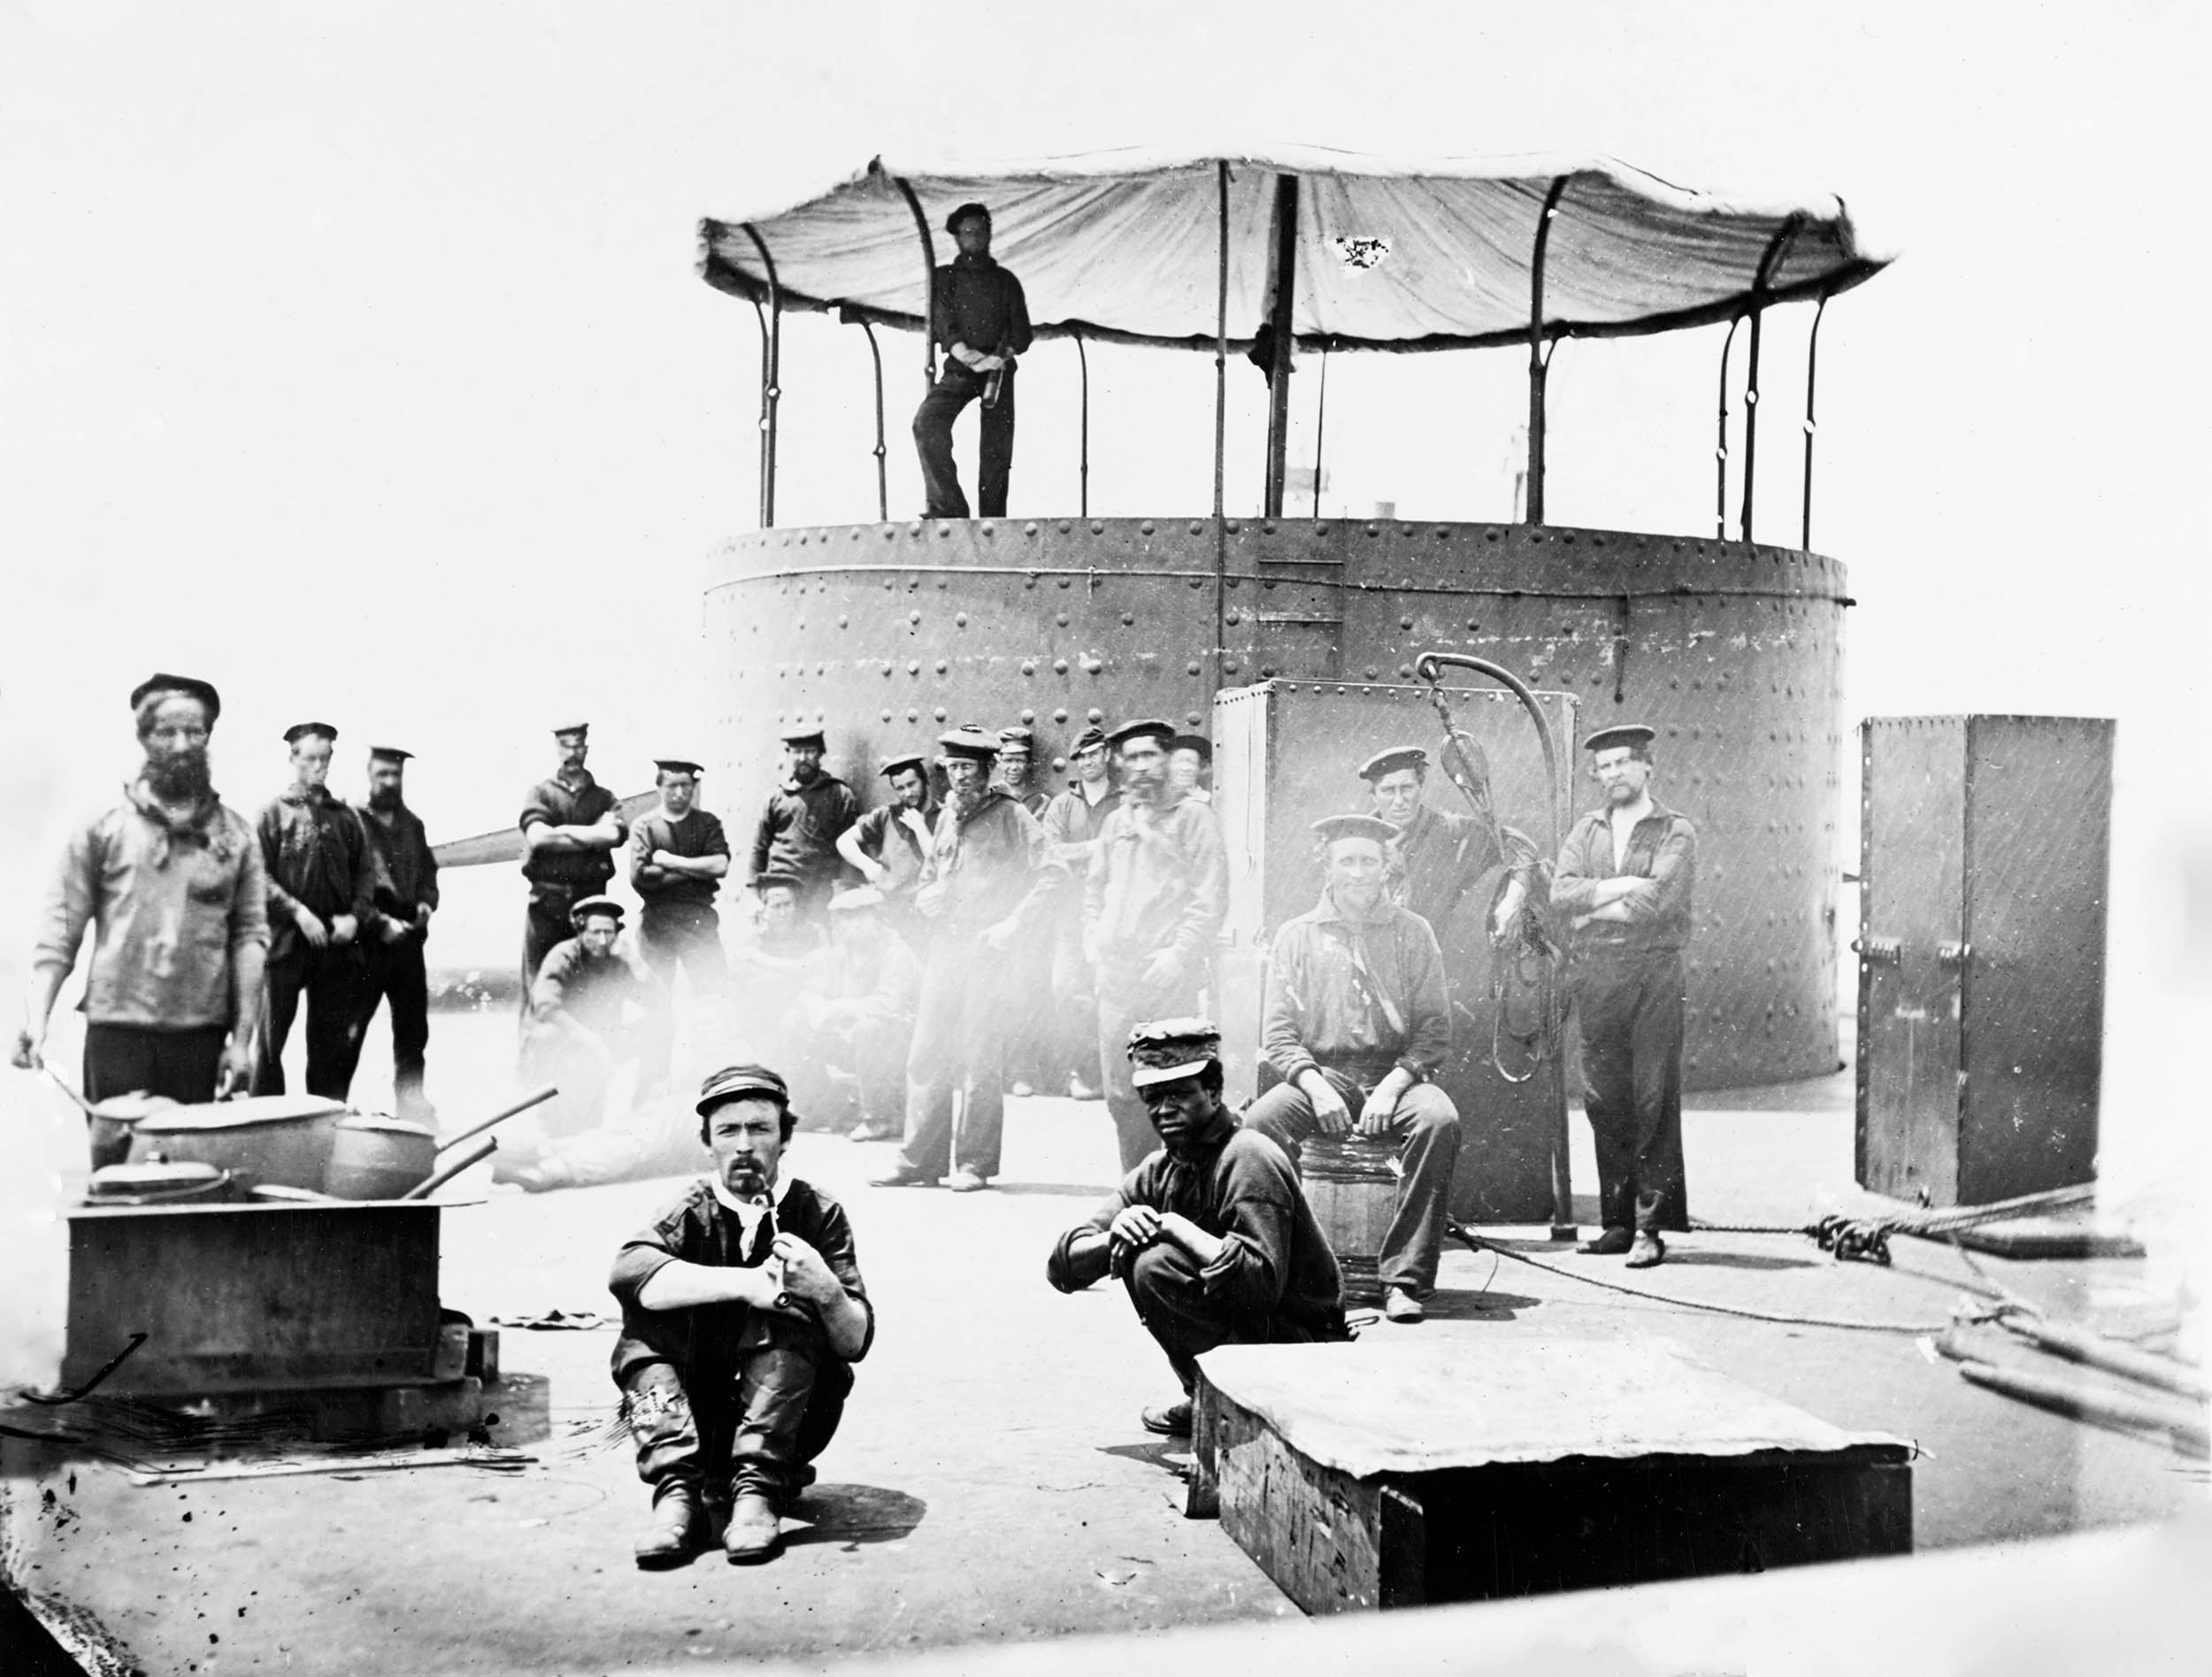 USS Monitor crewmembers cooking on deck, on James River in Virginia, July 9, 1862 (U.S. Navy/Courtesy Ronnie Bell